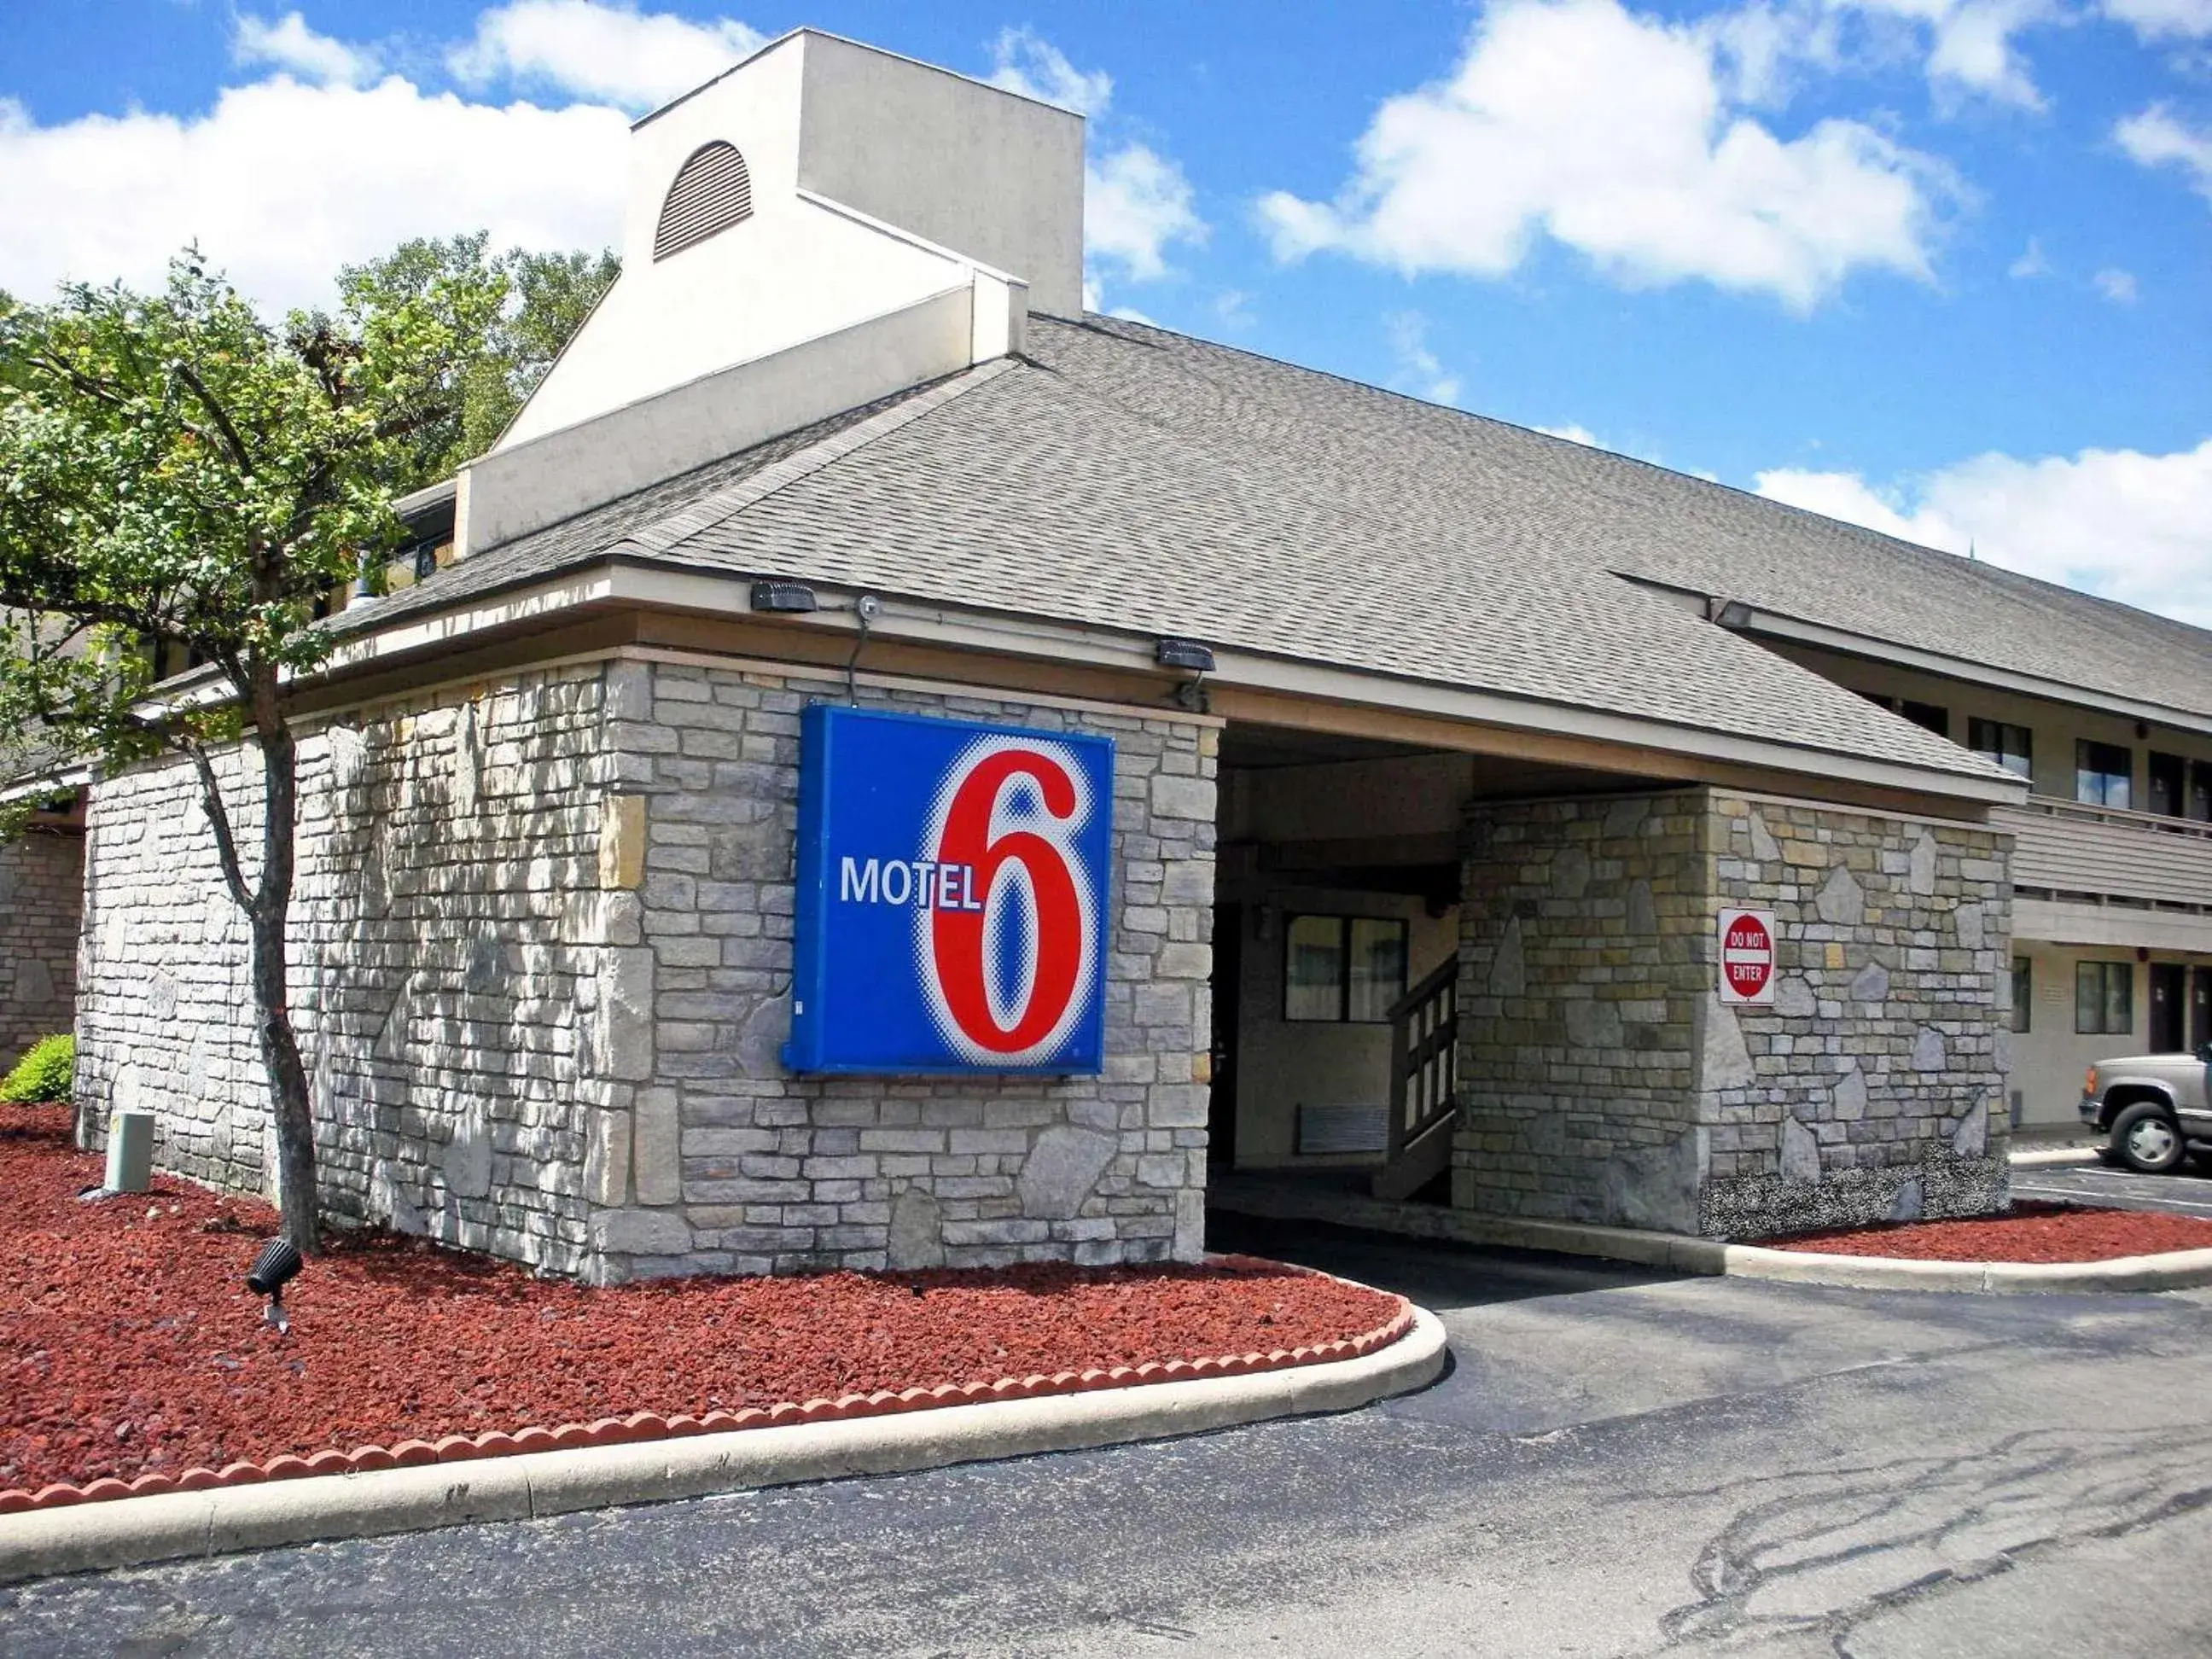 Property building in Motel 6-Dayton, OH - Englewood